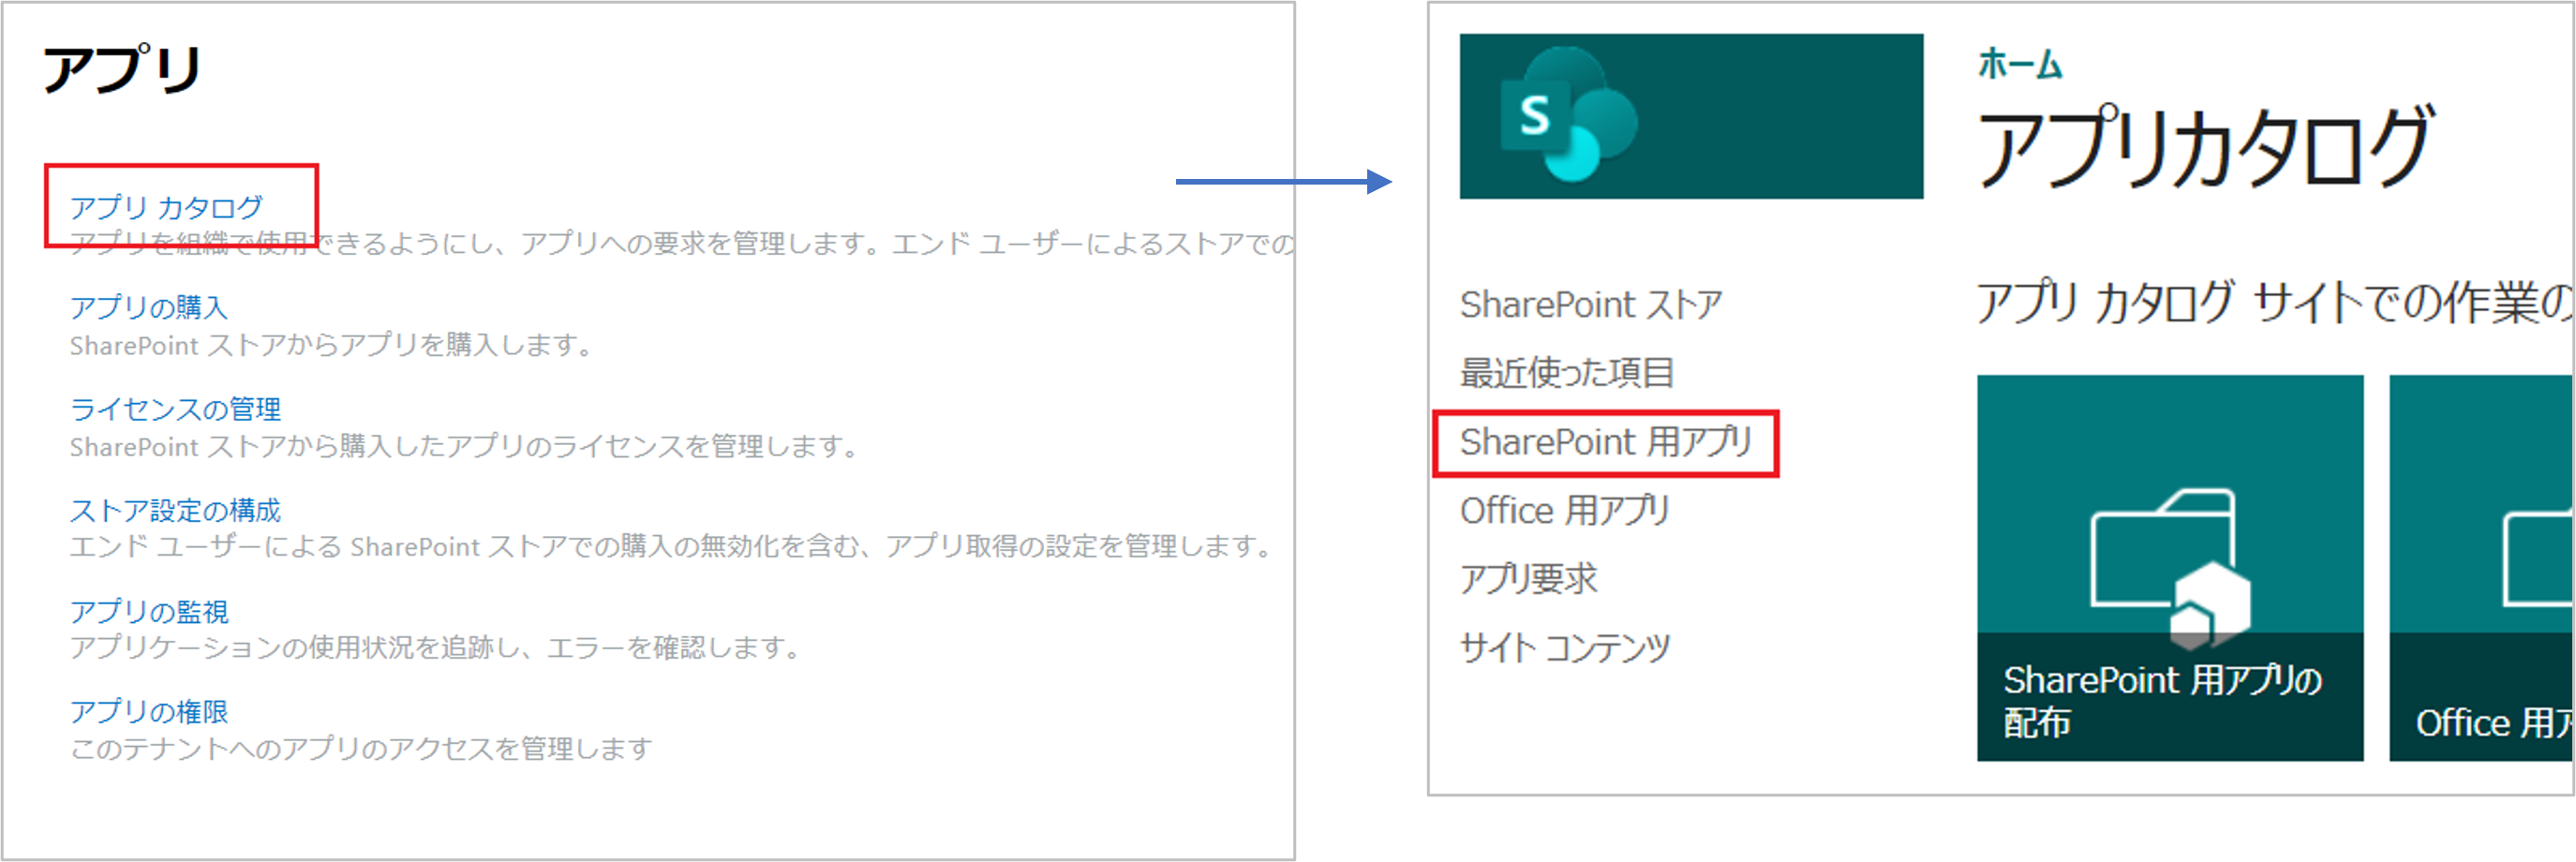 Sharepoint__Sharepoint____.png